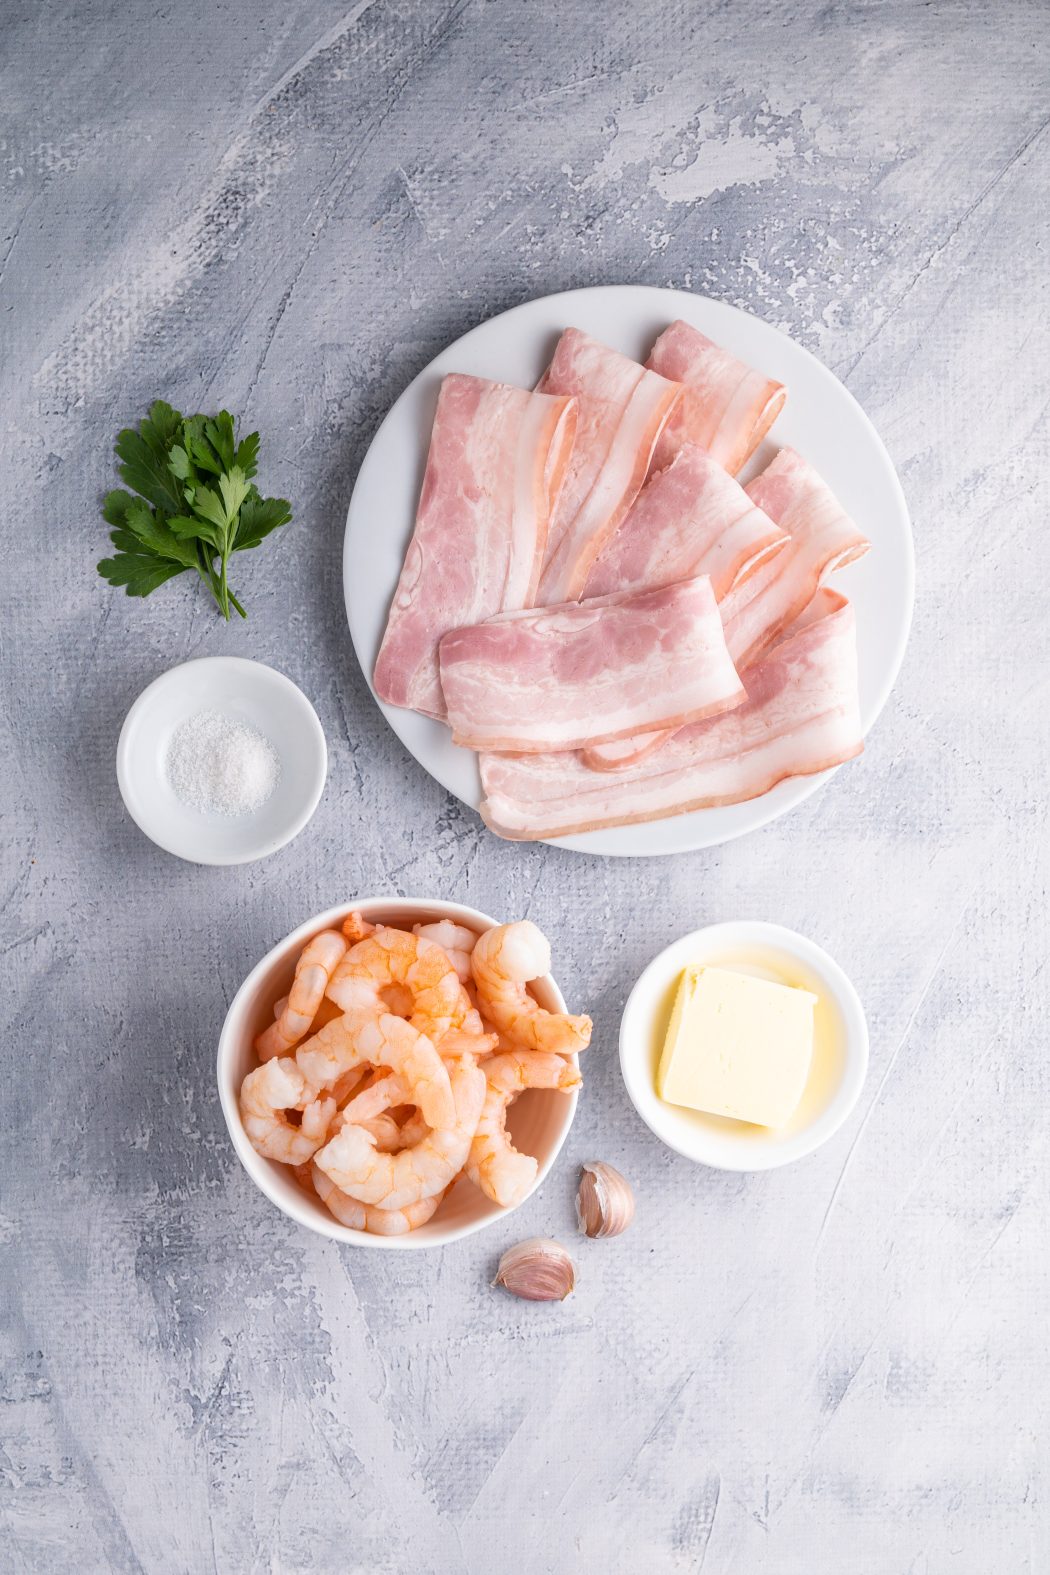 Ingredients to Bacon Wrapped Shrimp
